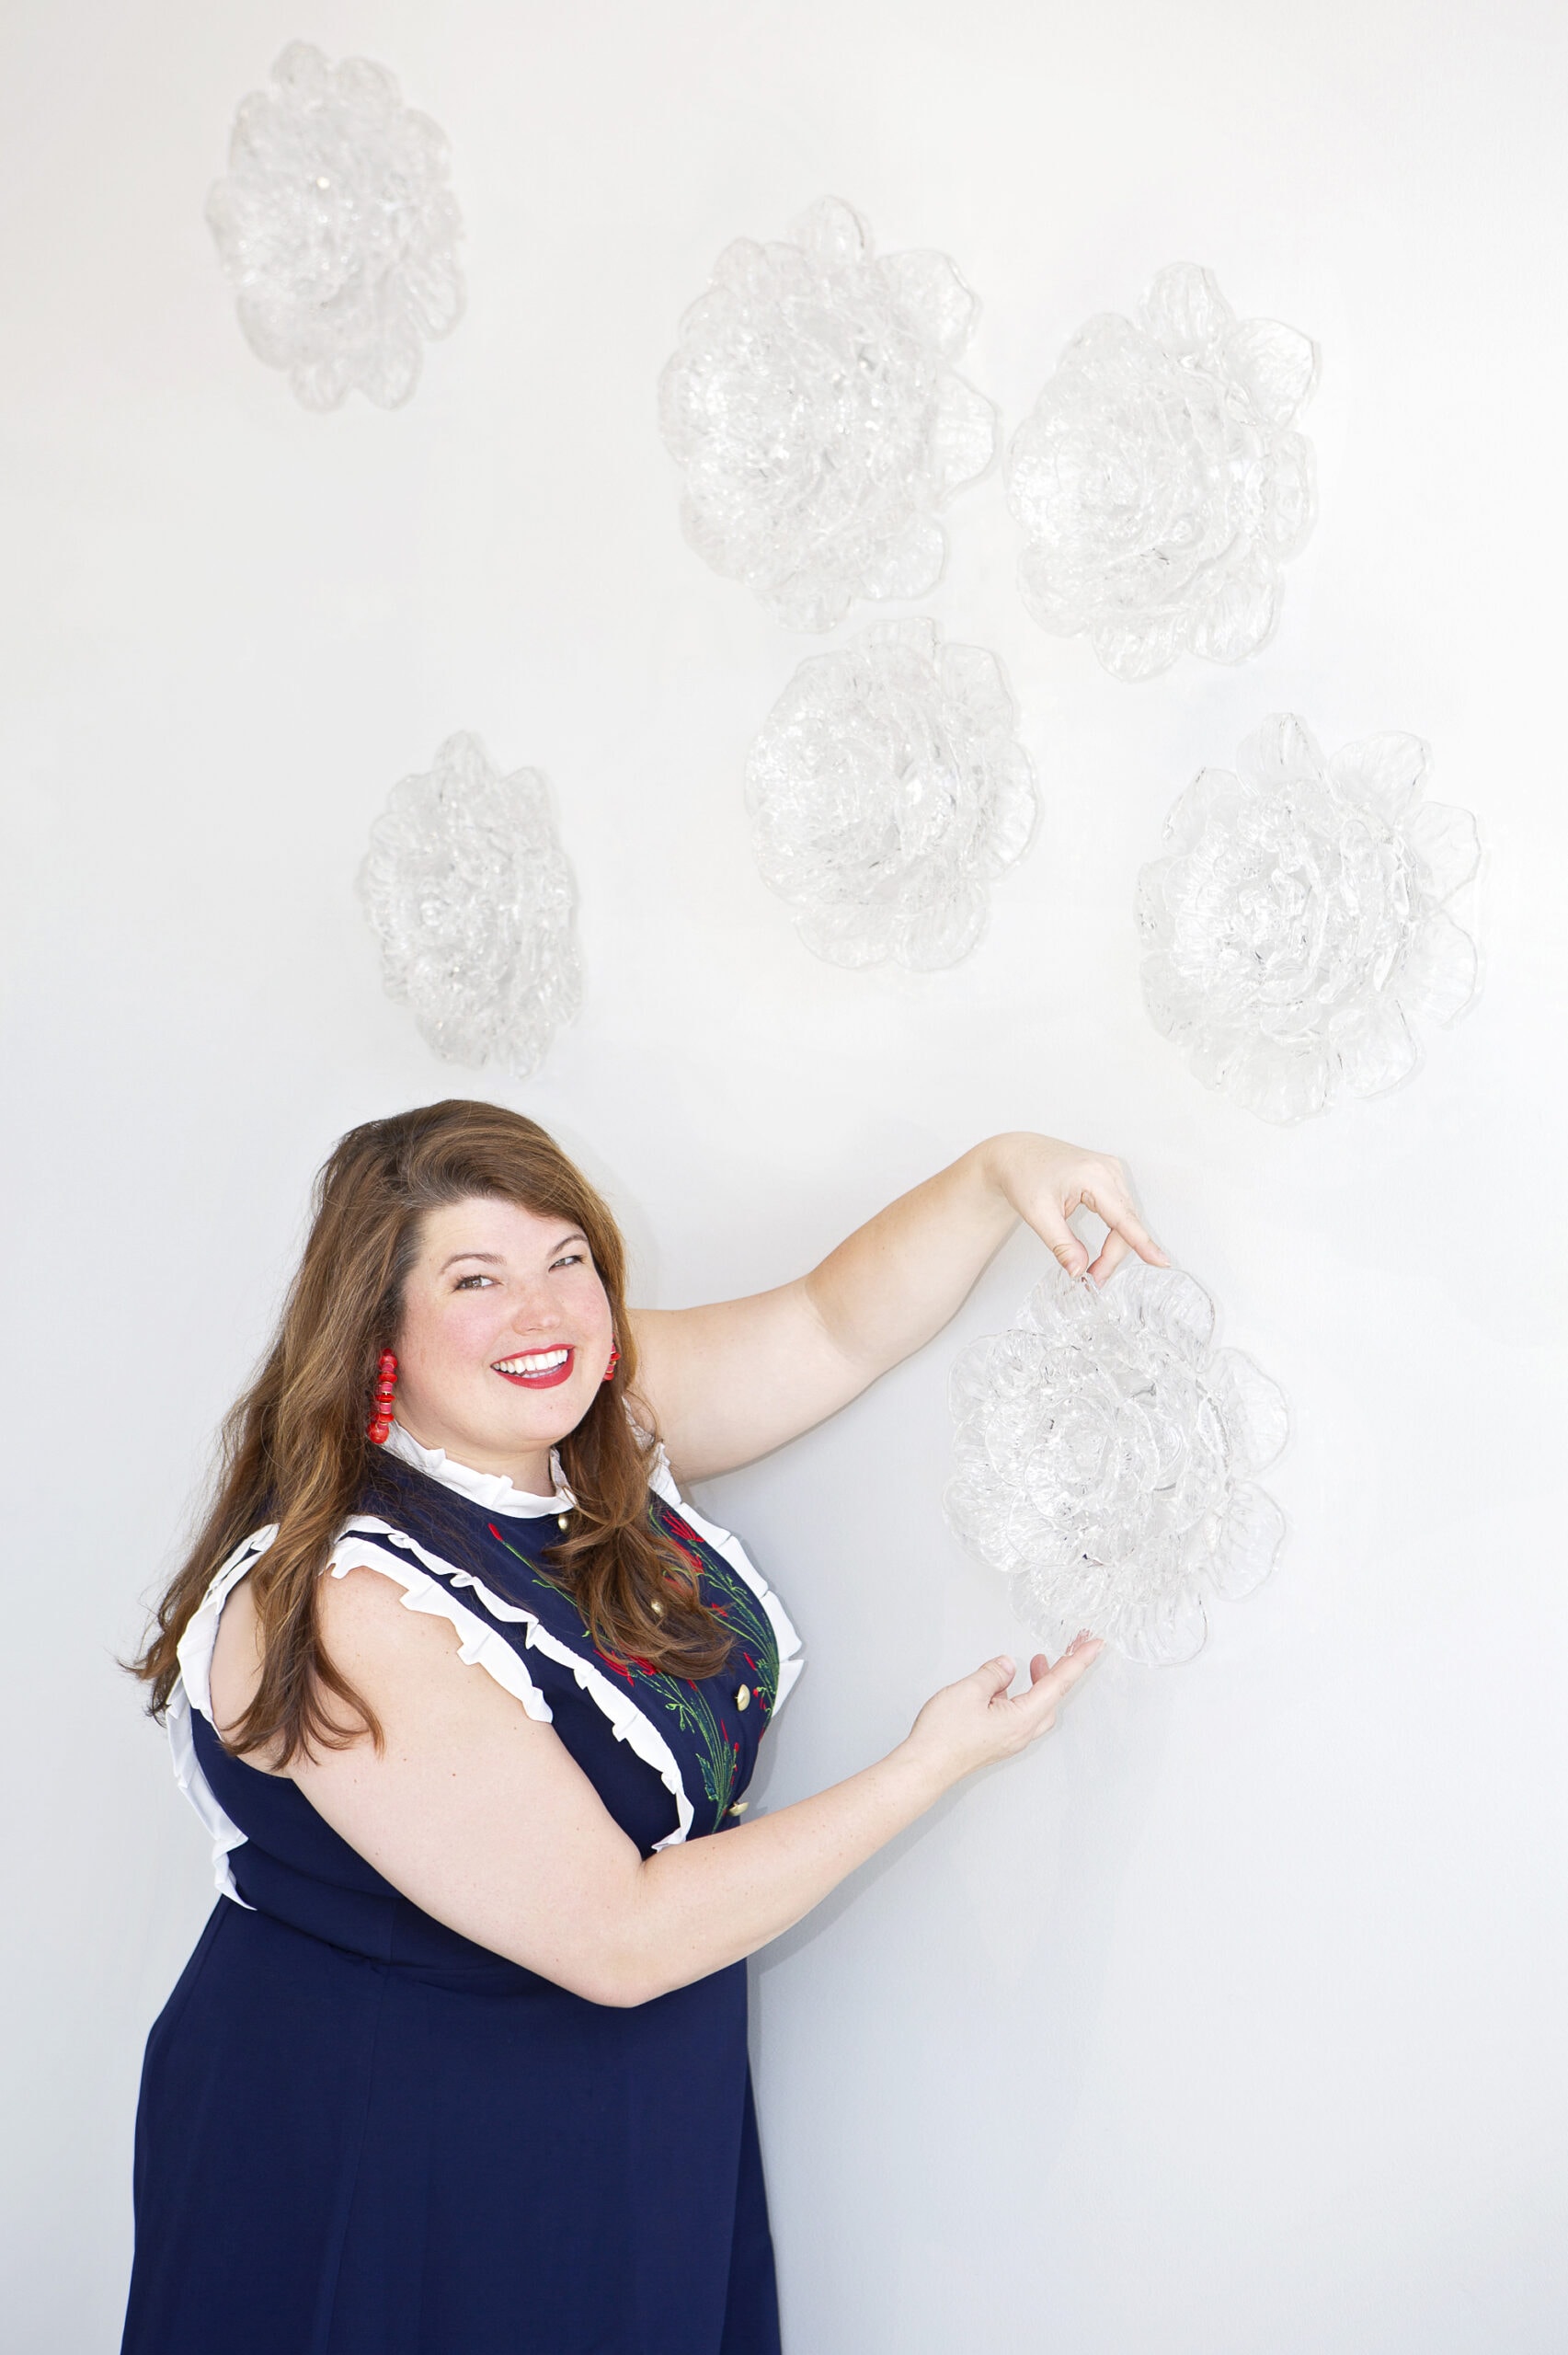 Anna with hot glass flower installation on a white wall